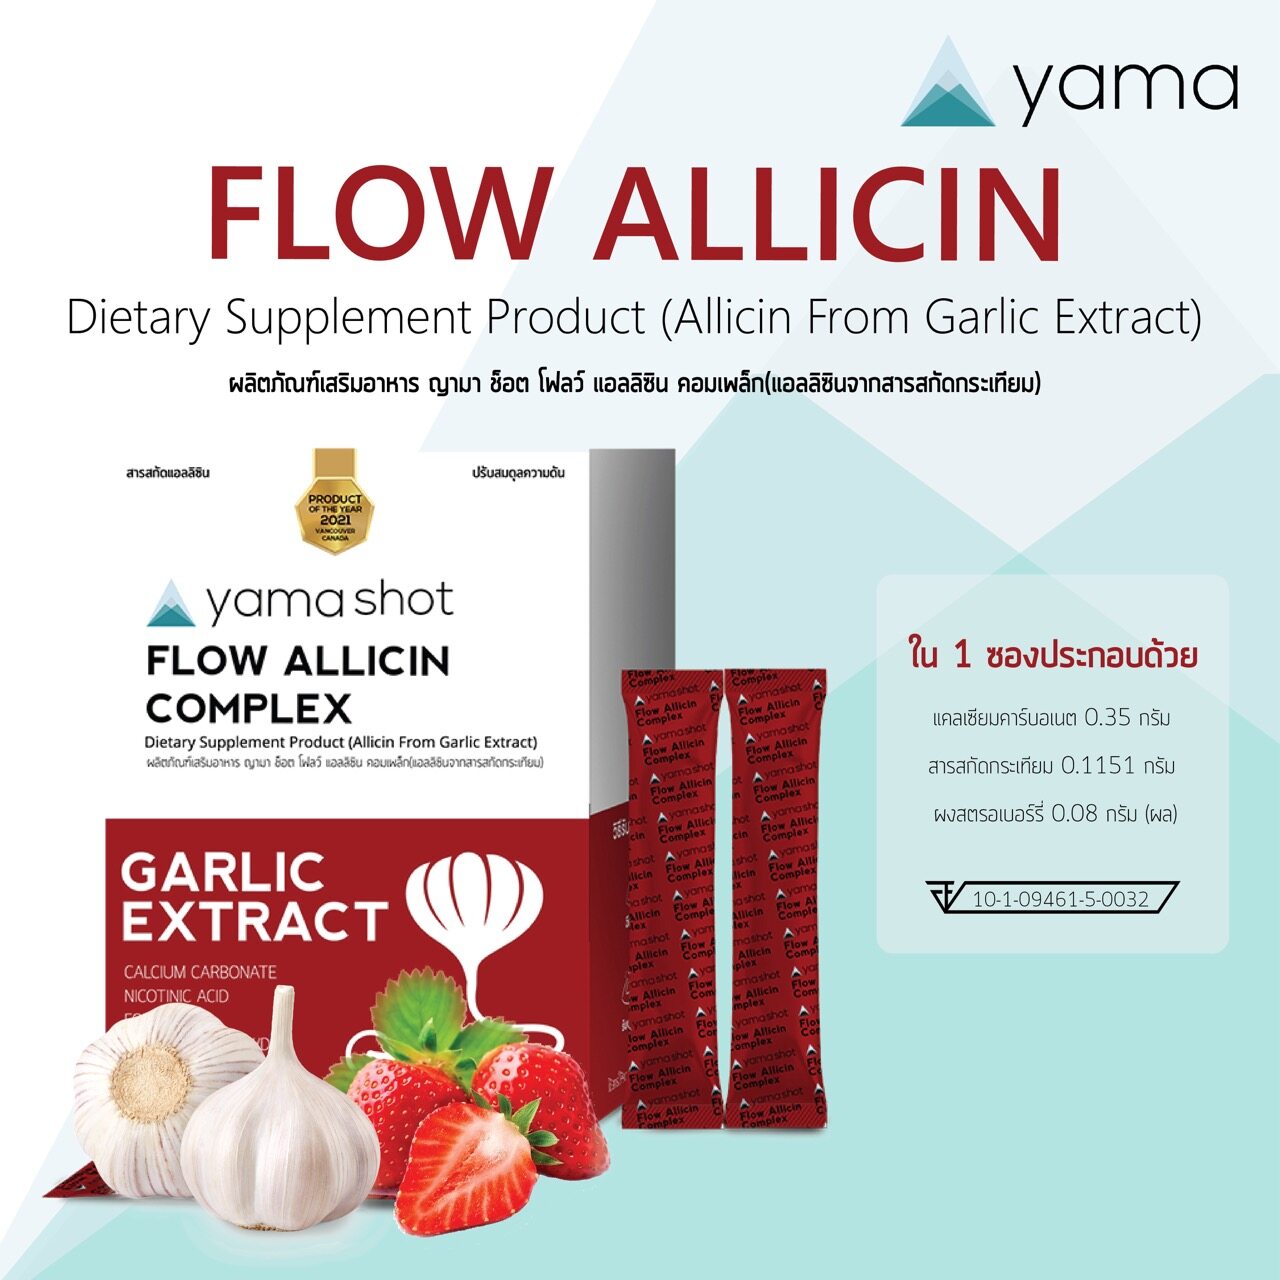 YAMA SHOT Flow Allicin Complex Dietary Supplement Product Allicin From Garlic Extract